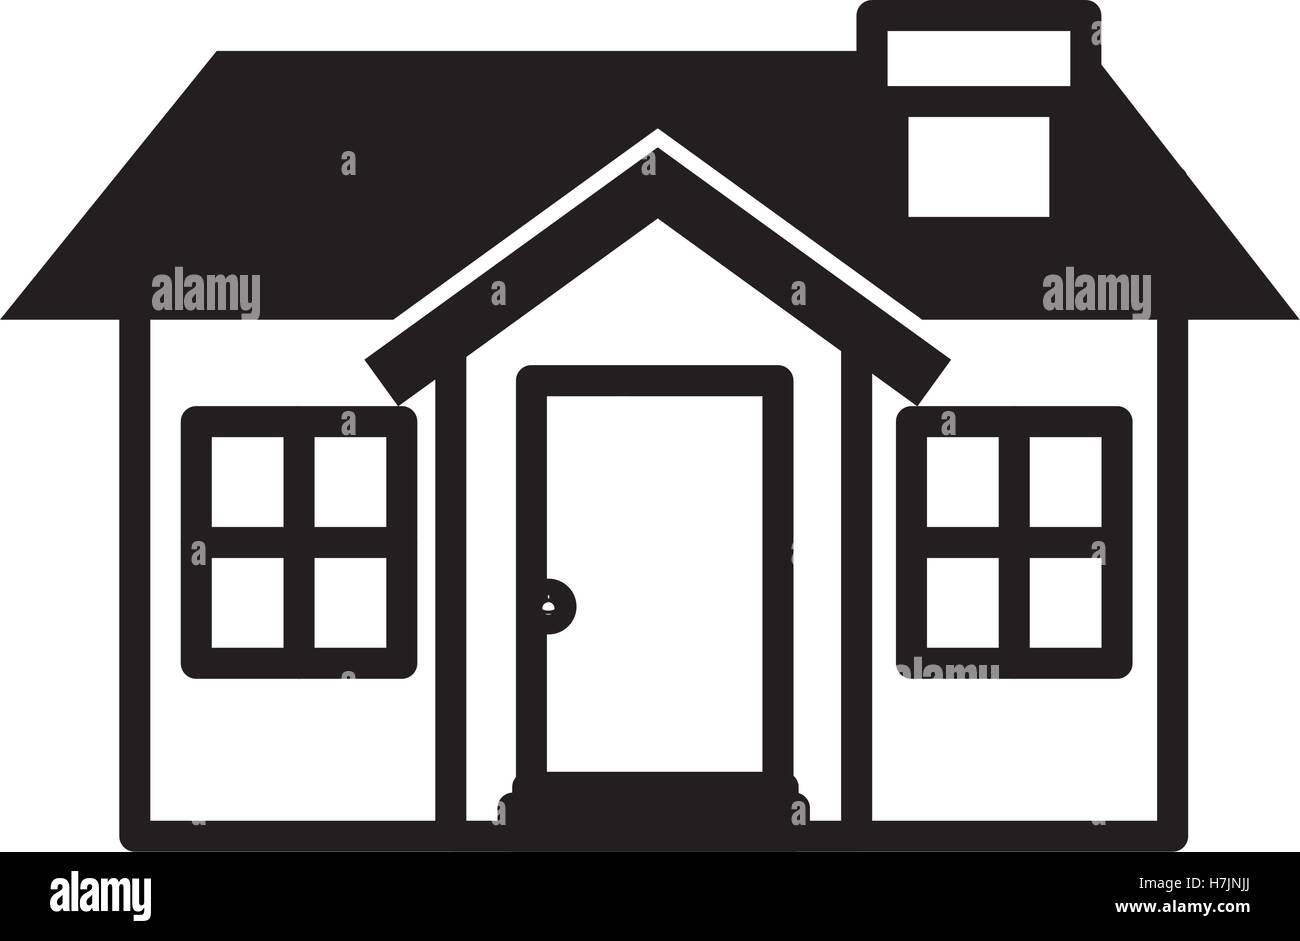 Home building icon. silhouette of house architecture and real estate ...